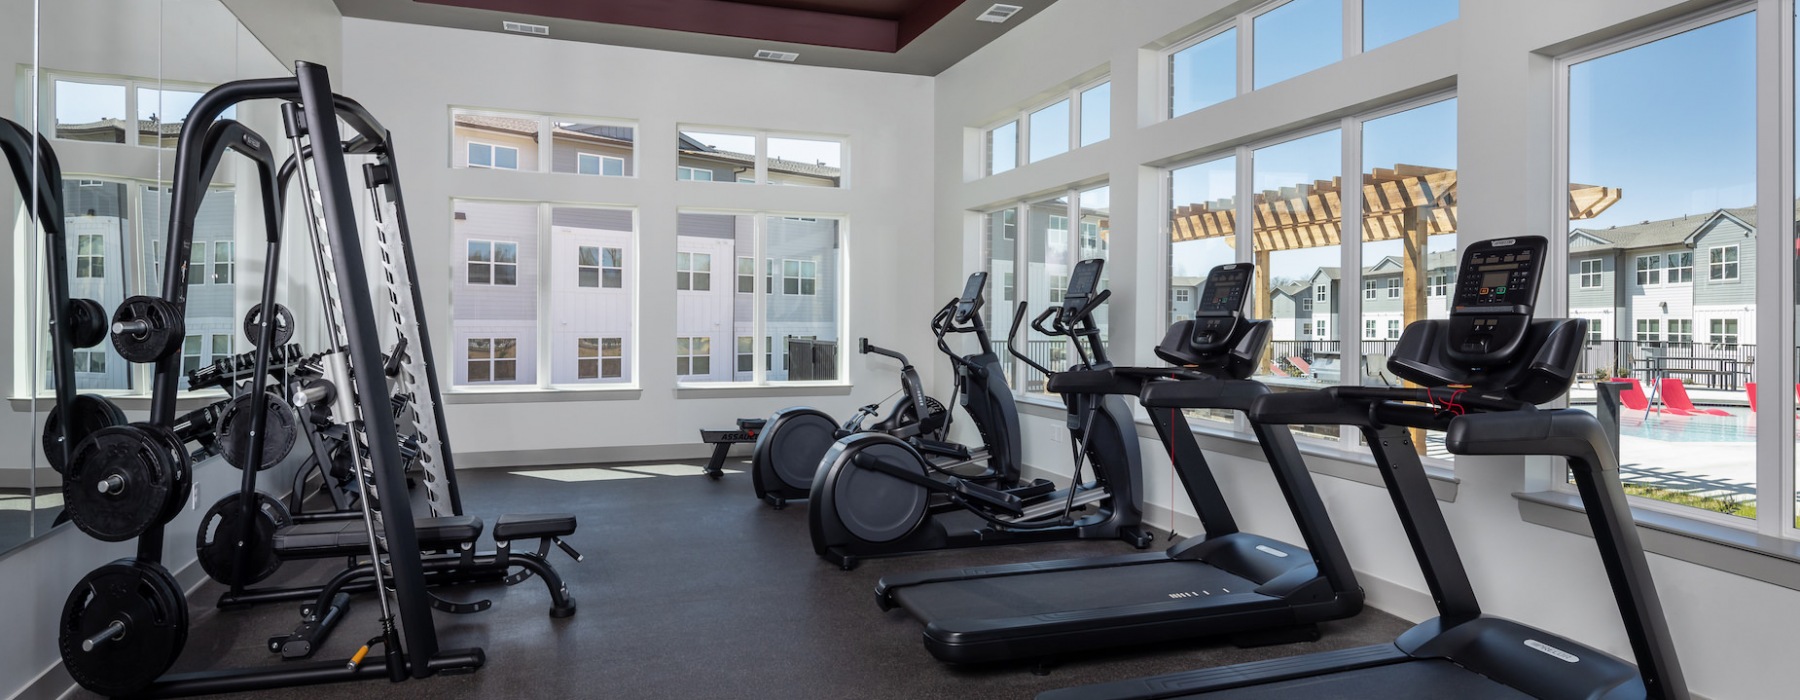 fitness center with treadmills and windows overlooking the pool